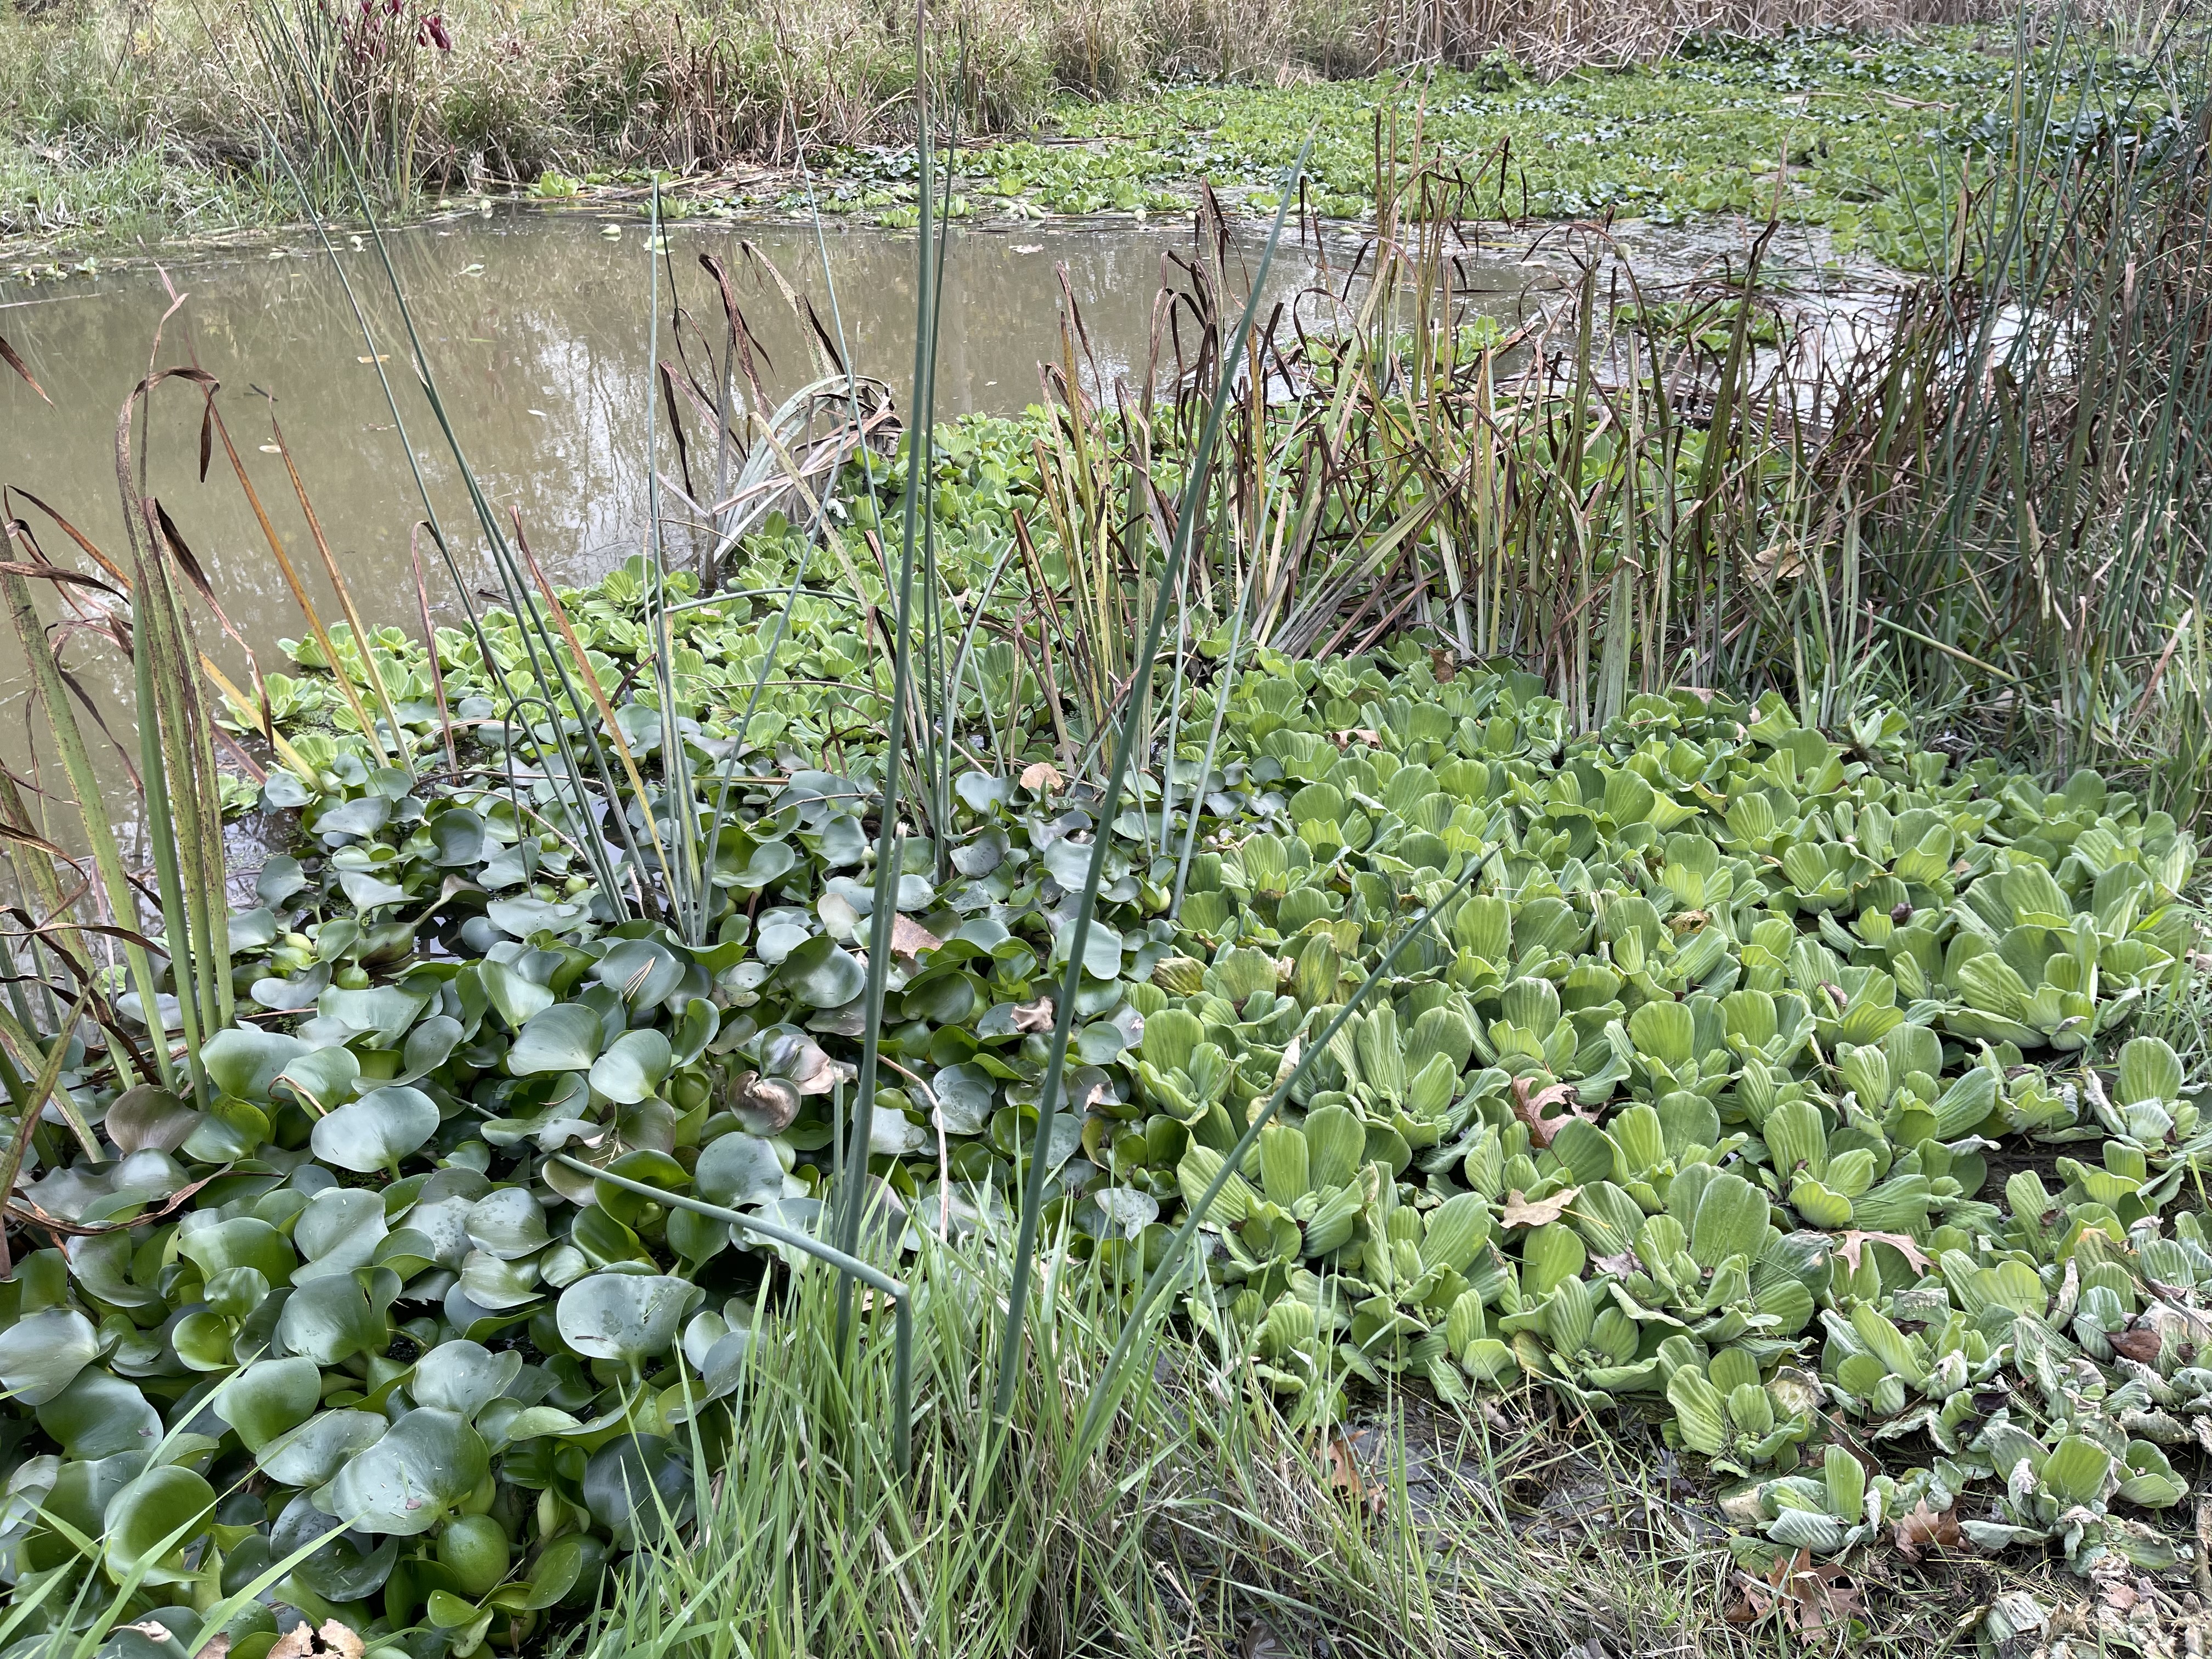 Water lettuce and water hyacinth in Macomb County, Michigan.